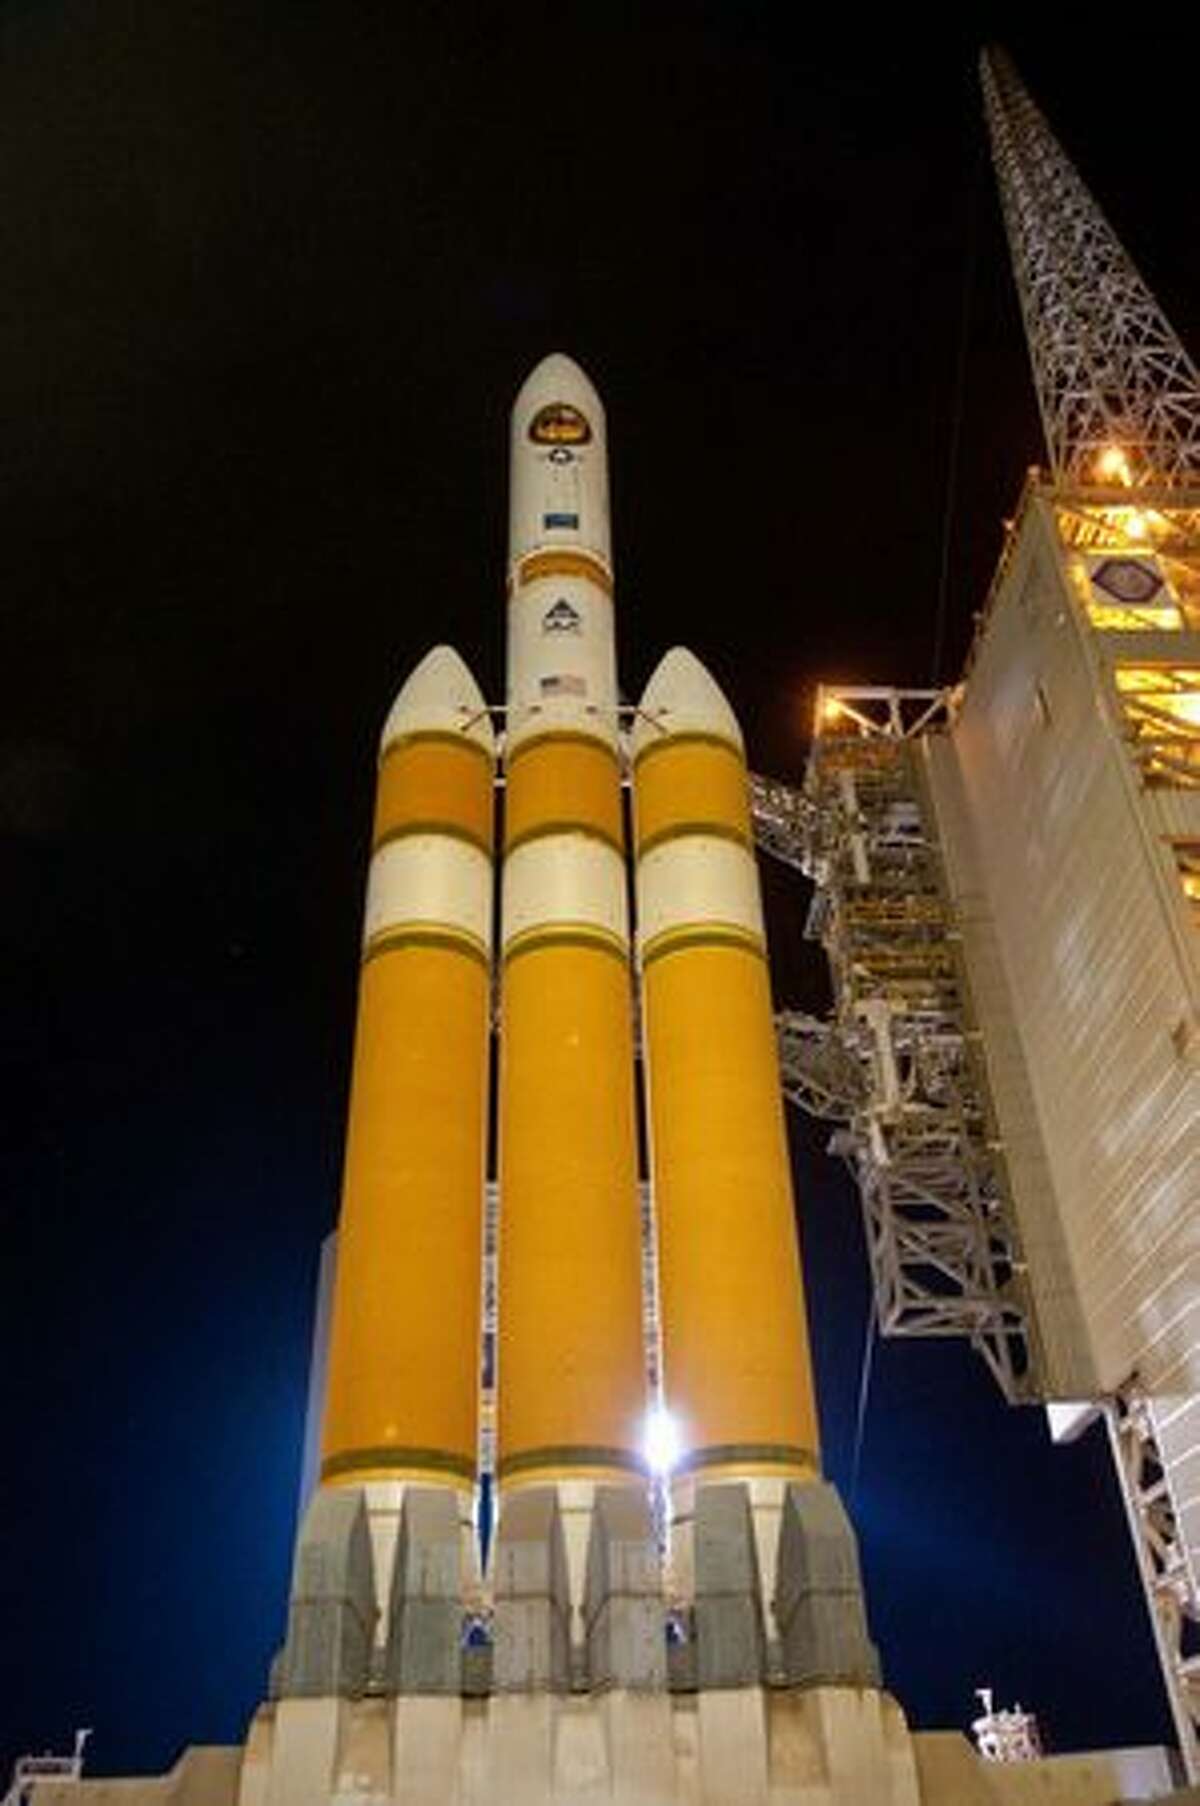 A United Launch Alliance Delta IV rocket sits on the launch pad at Vandenberg Air Force Base, Calif. (Pat Corkery/United Launch Alliance)